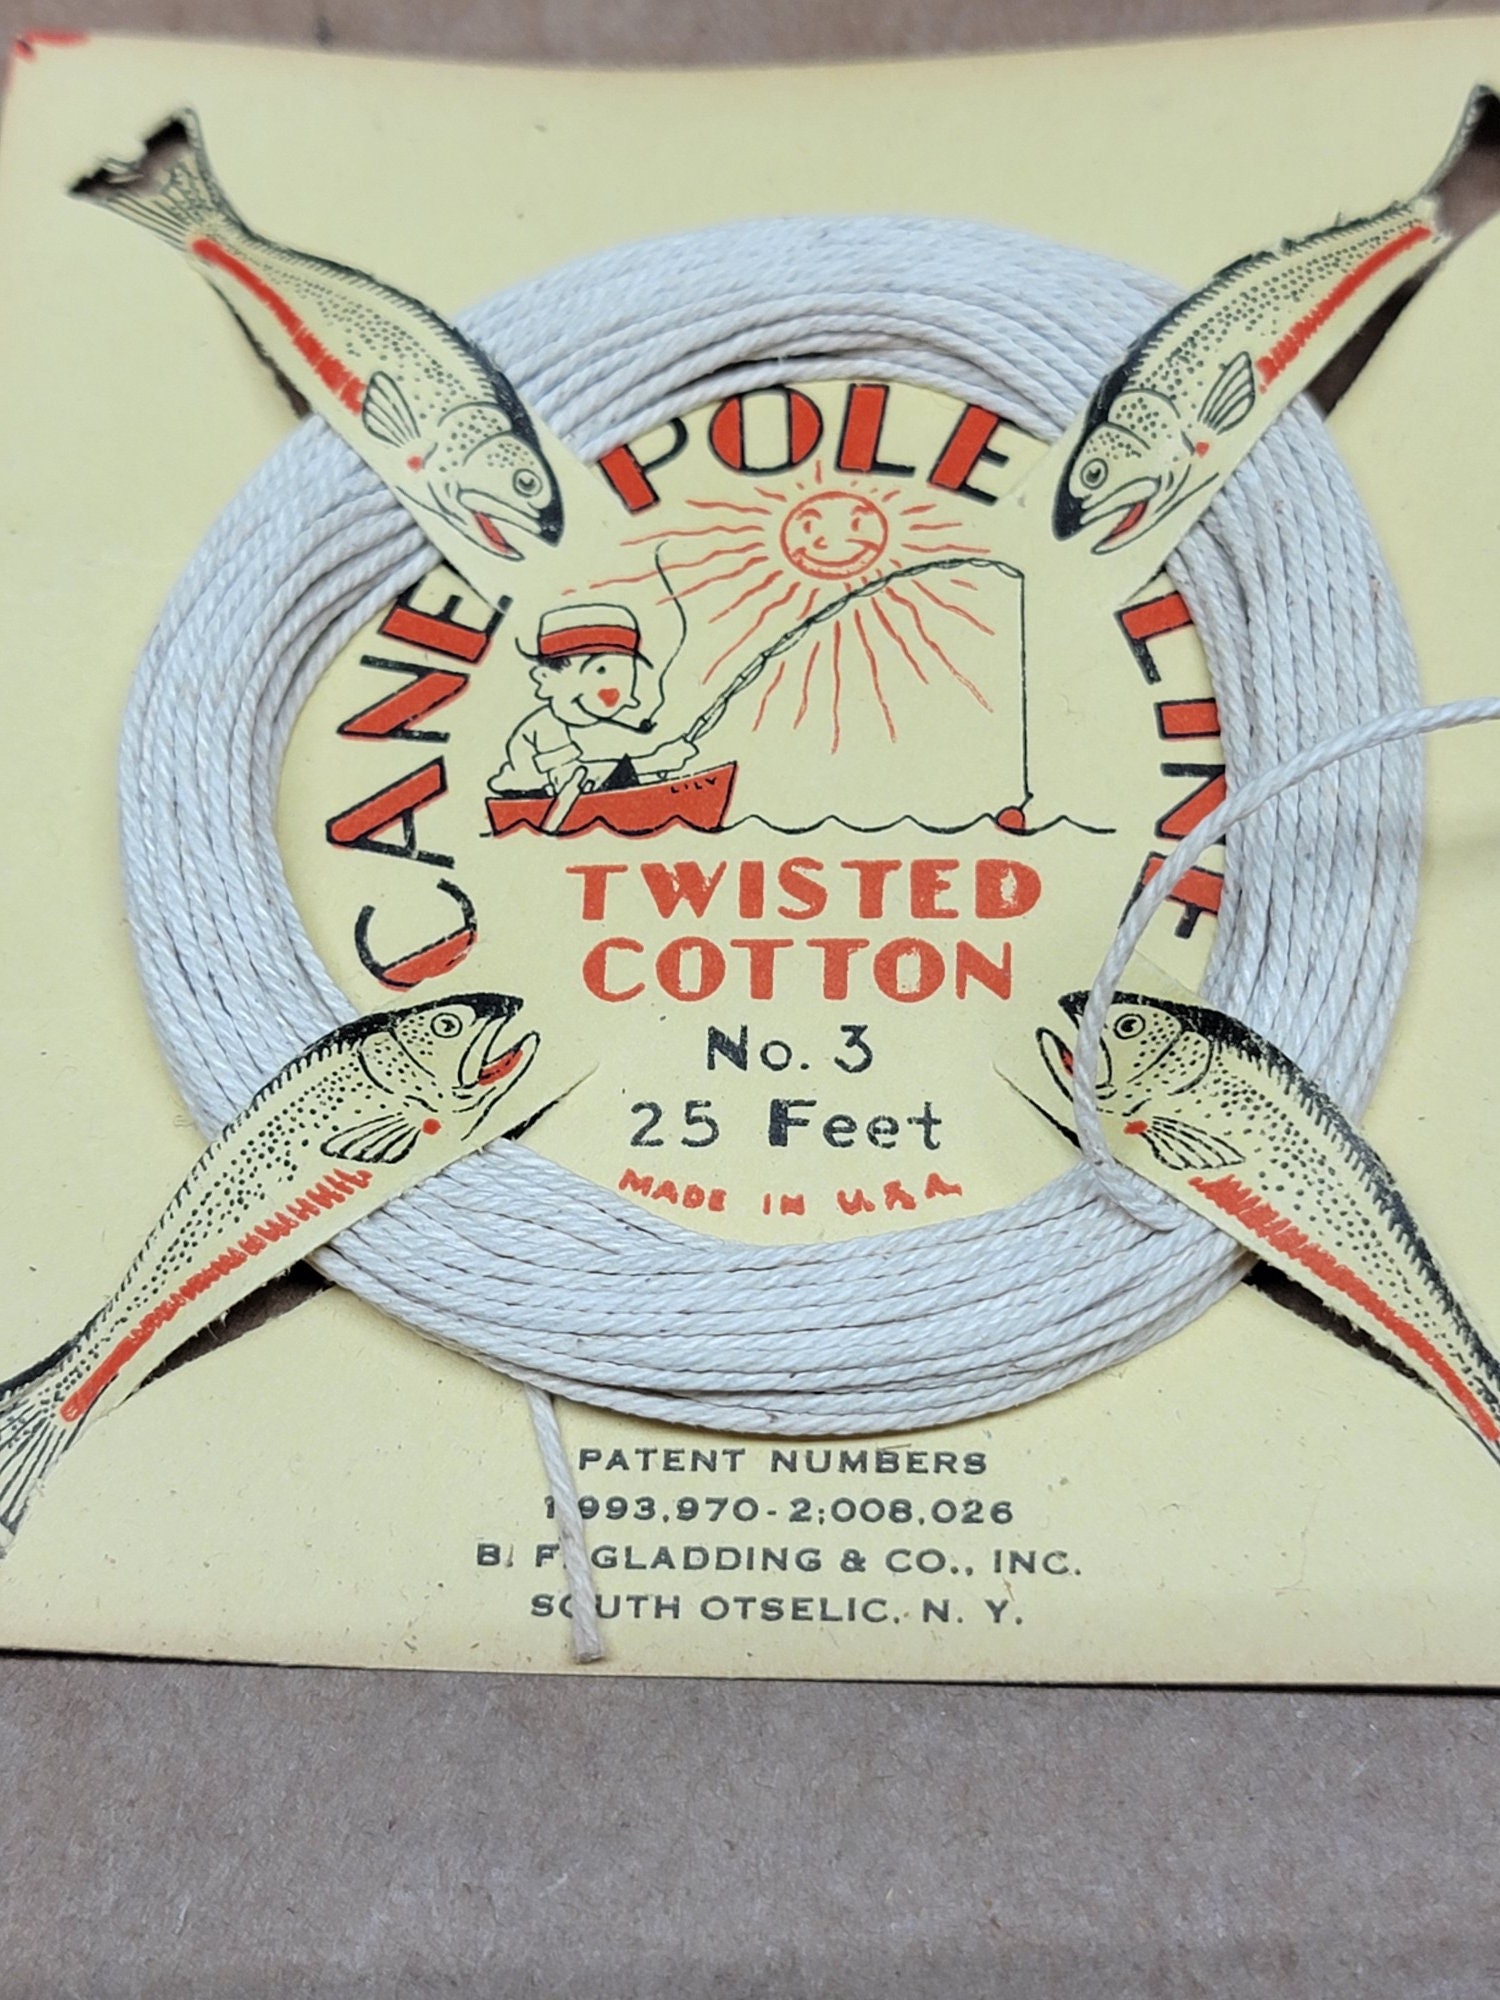 Vintage Cane Pole Fishing Line Twisted Cotton No. 3 25 Feet per Section 3  New Old Stock Sections -  Canada